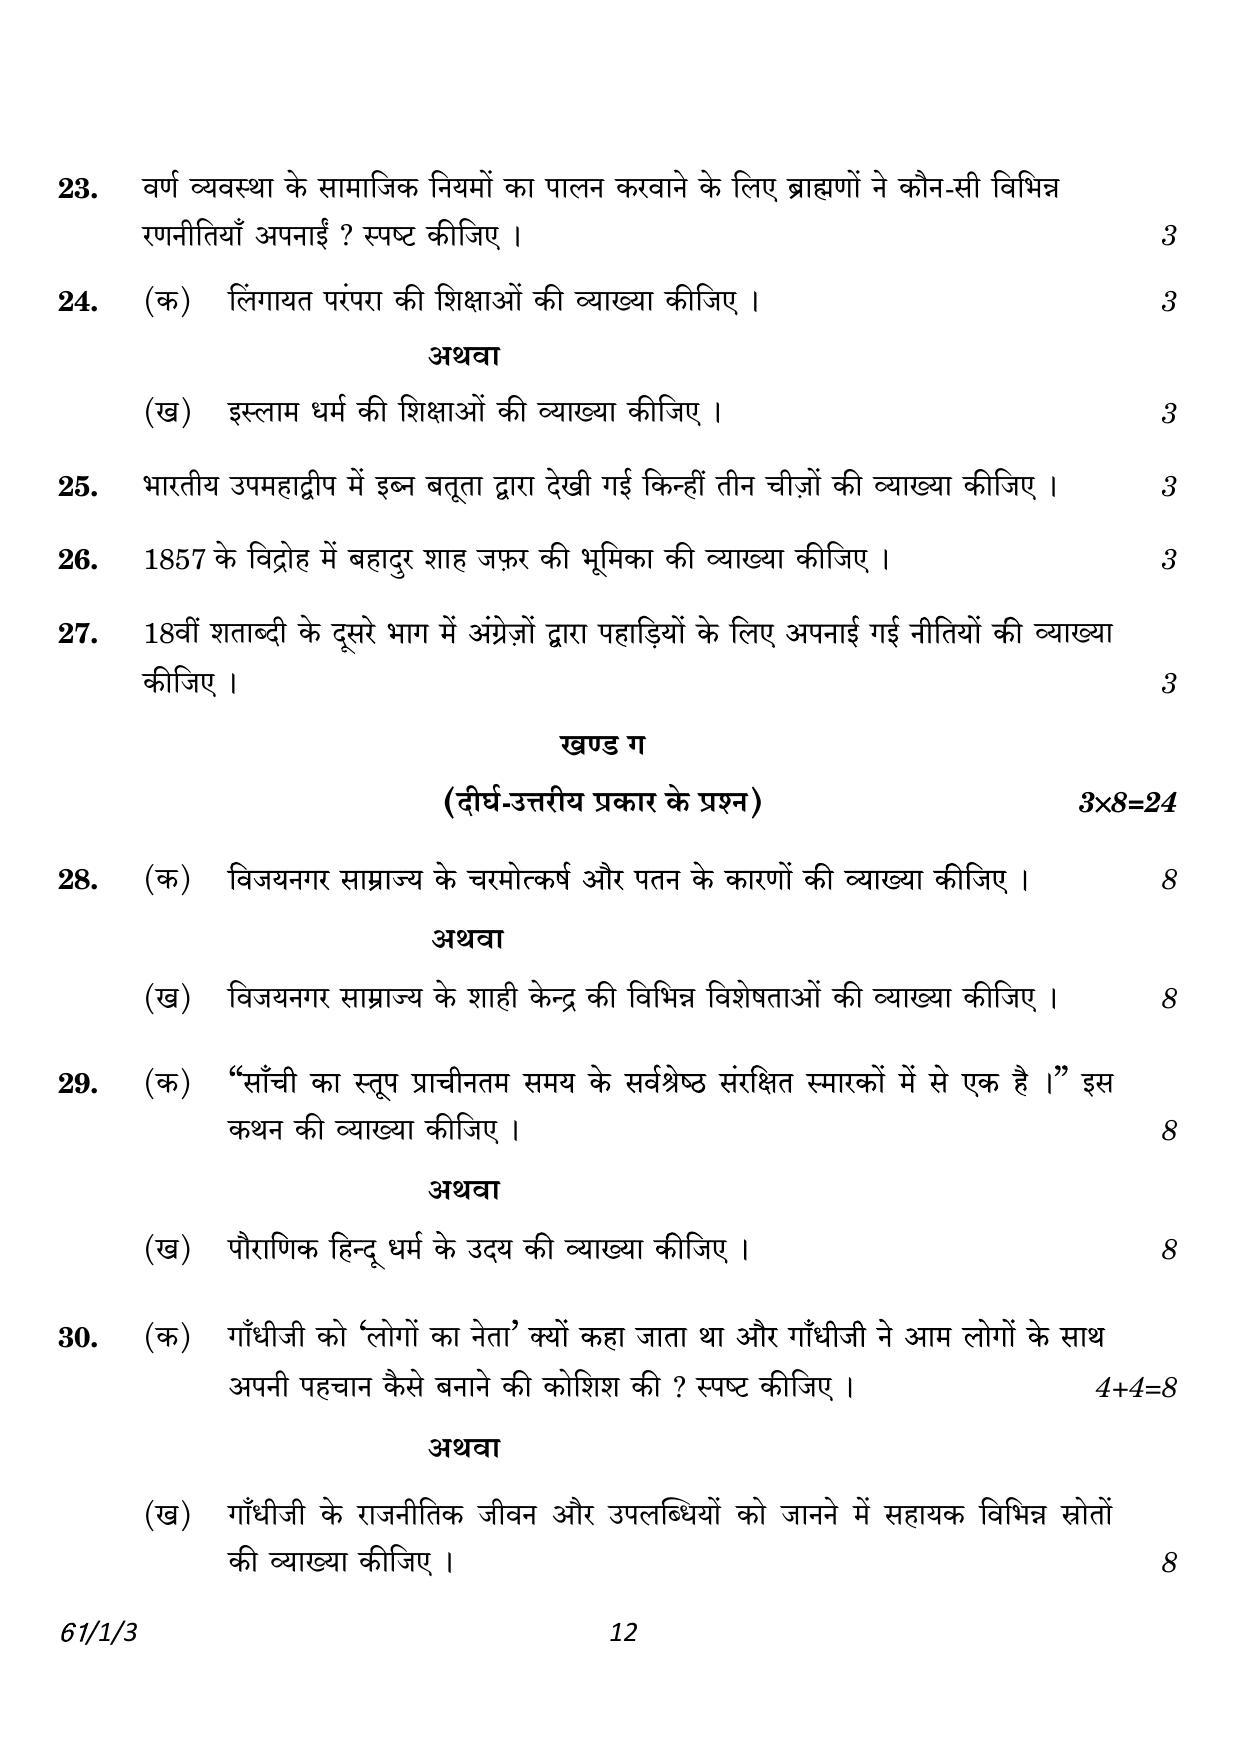 CBSE Class 12 61-1-3 History 2023 Question Paper - Page 12